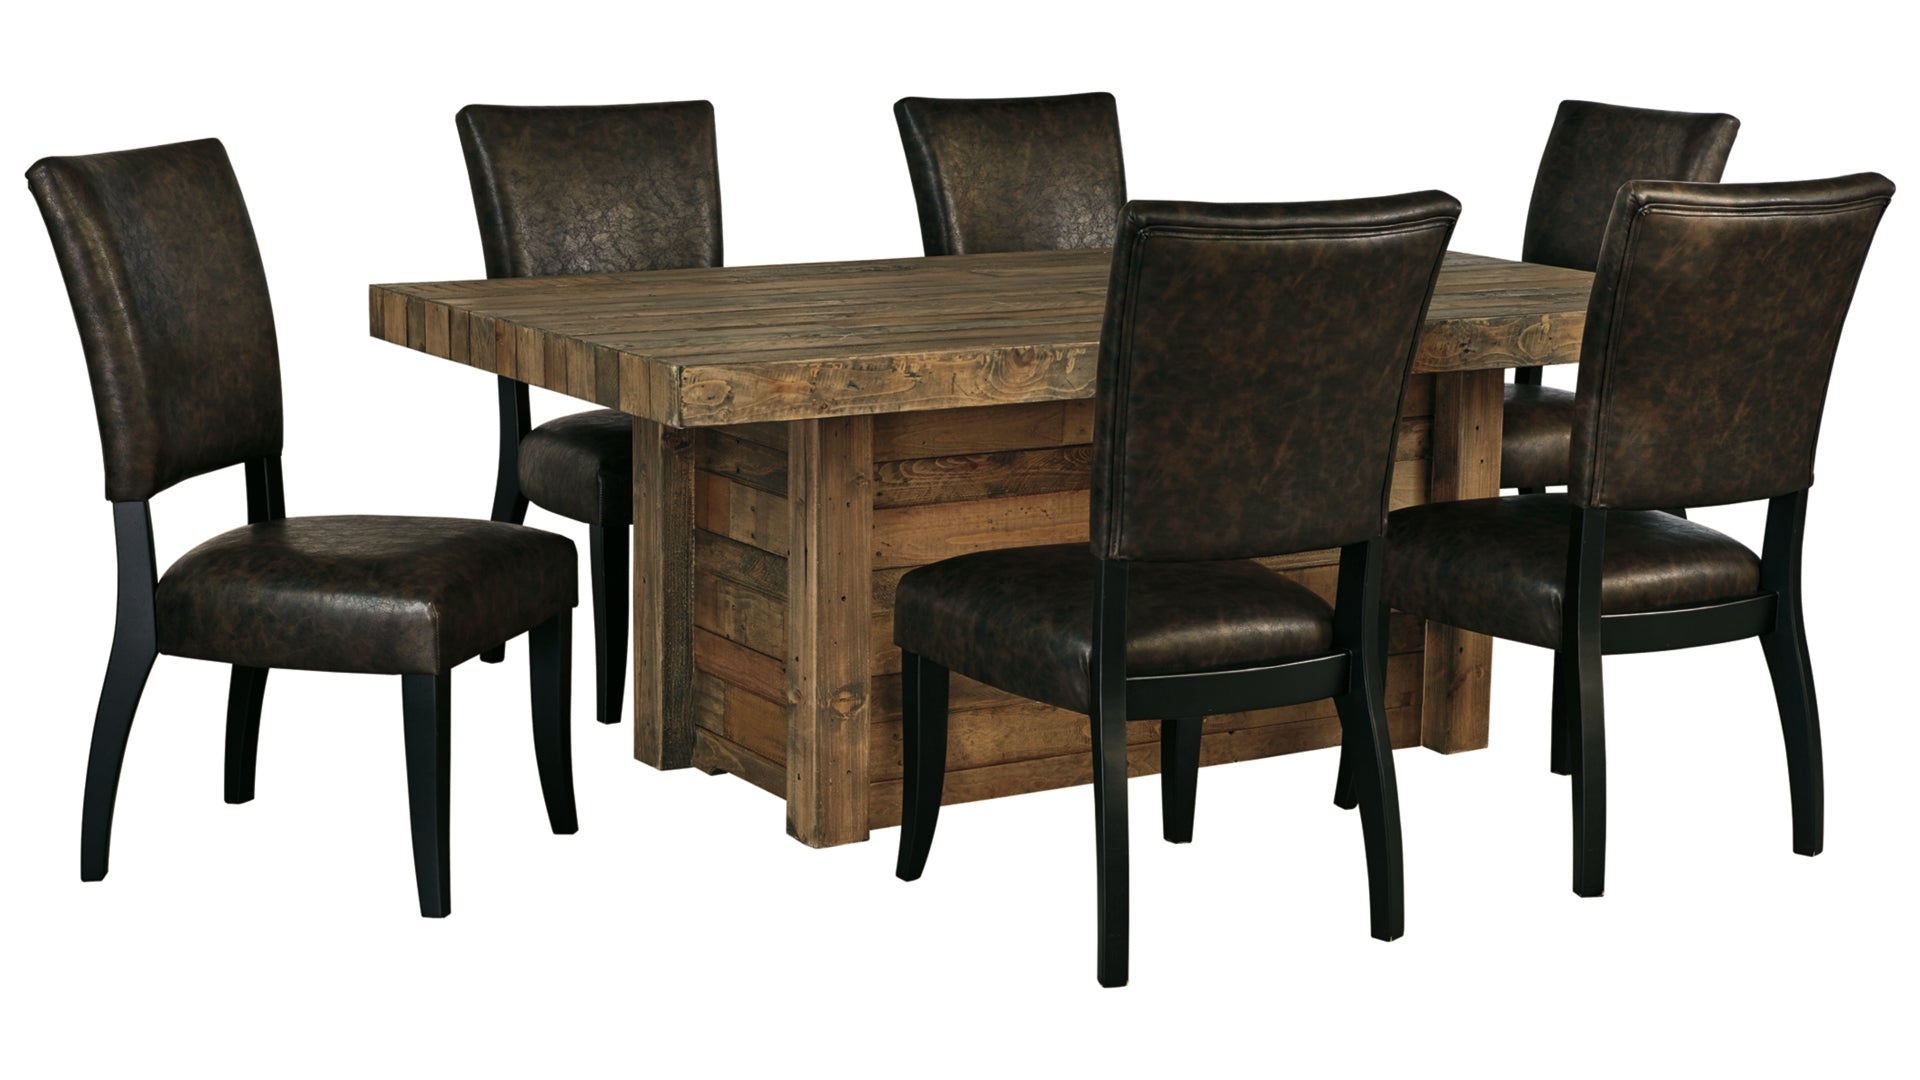 Sommerford Dining Table and 6 Chairs